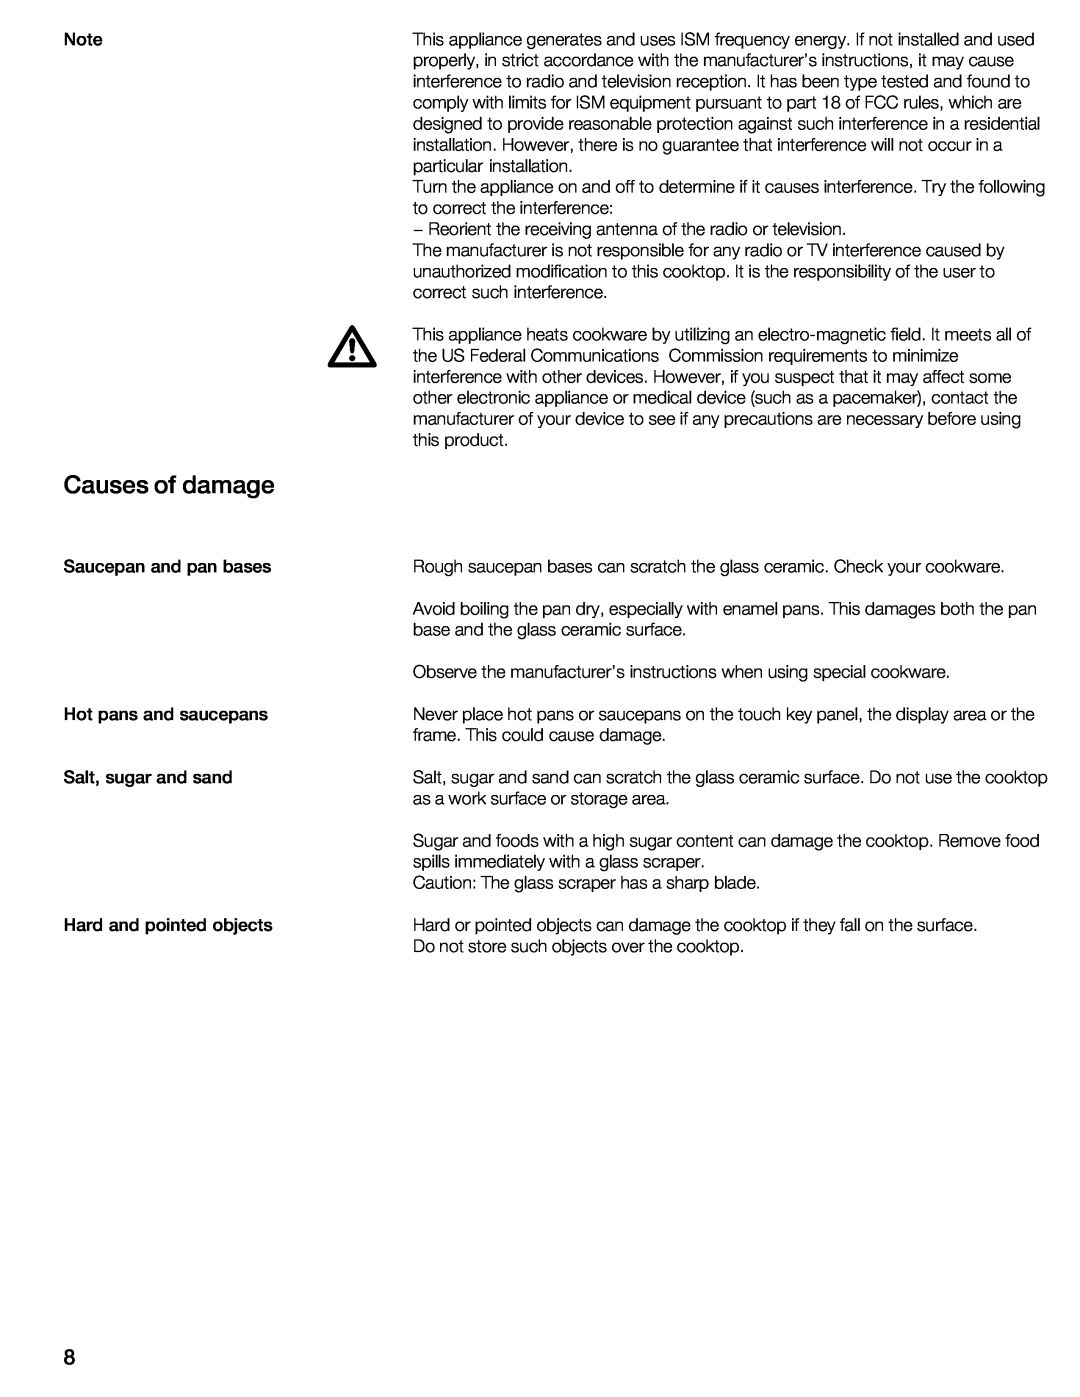 Bosch Appliances NIT8053UC manual Causes of damage 